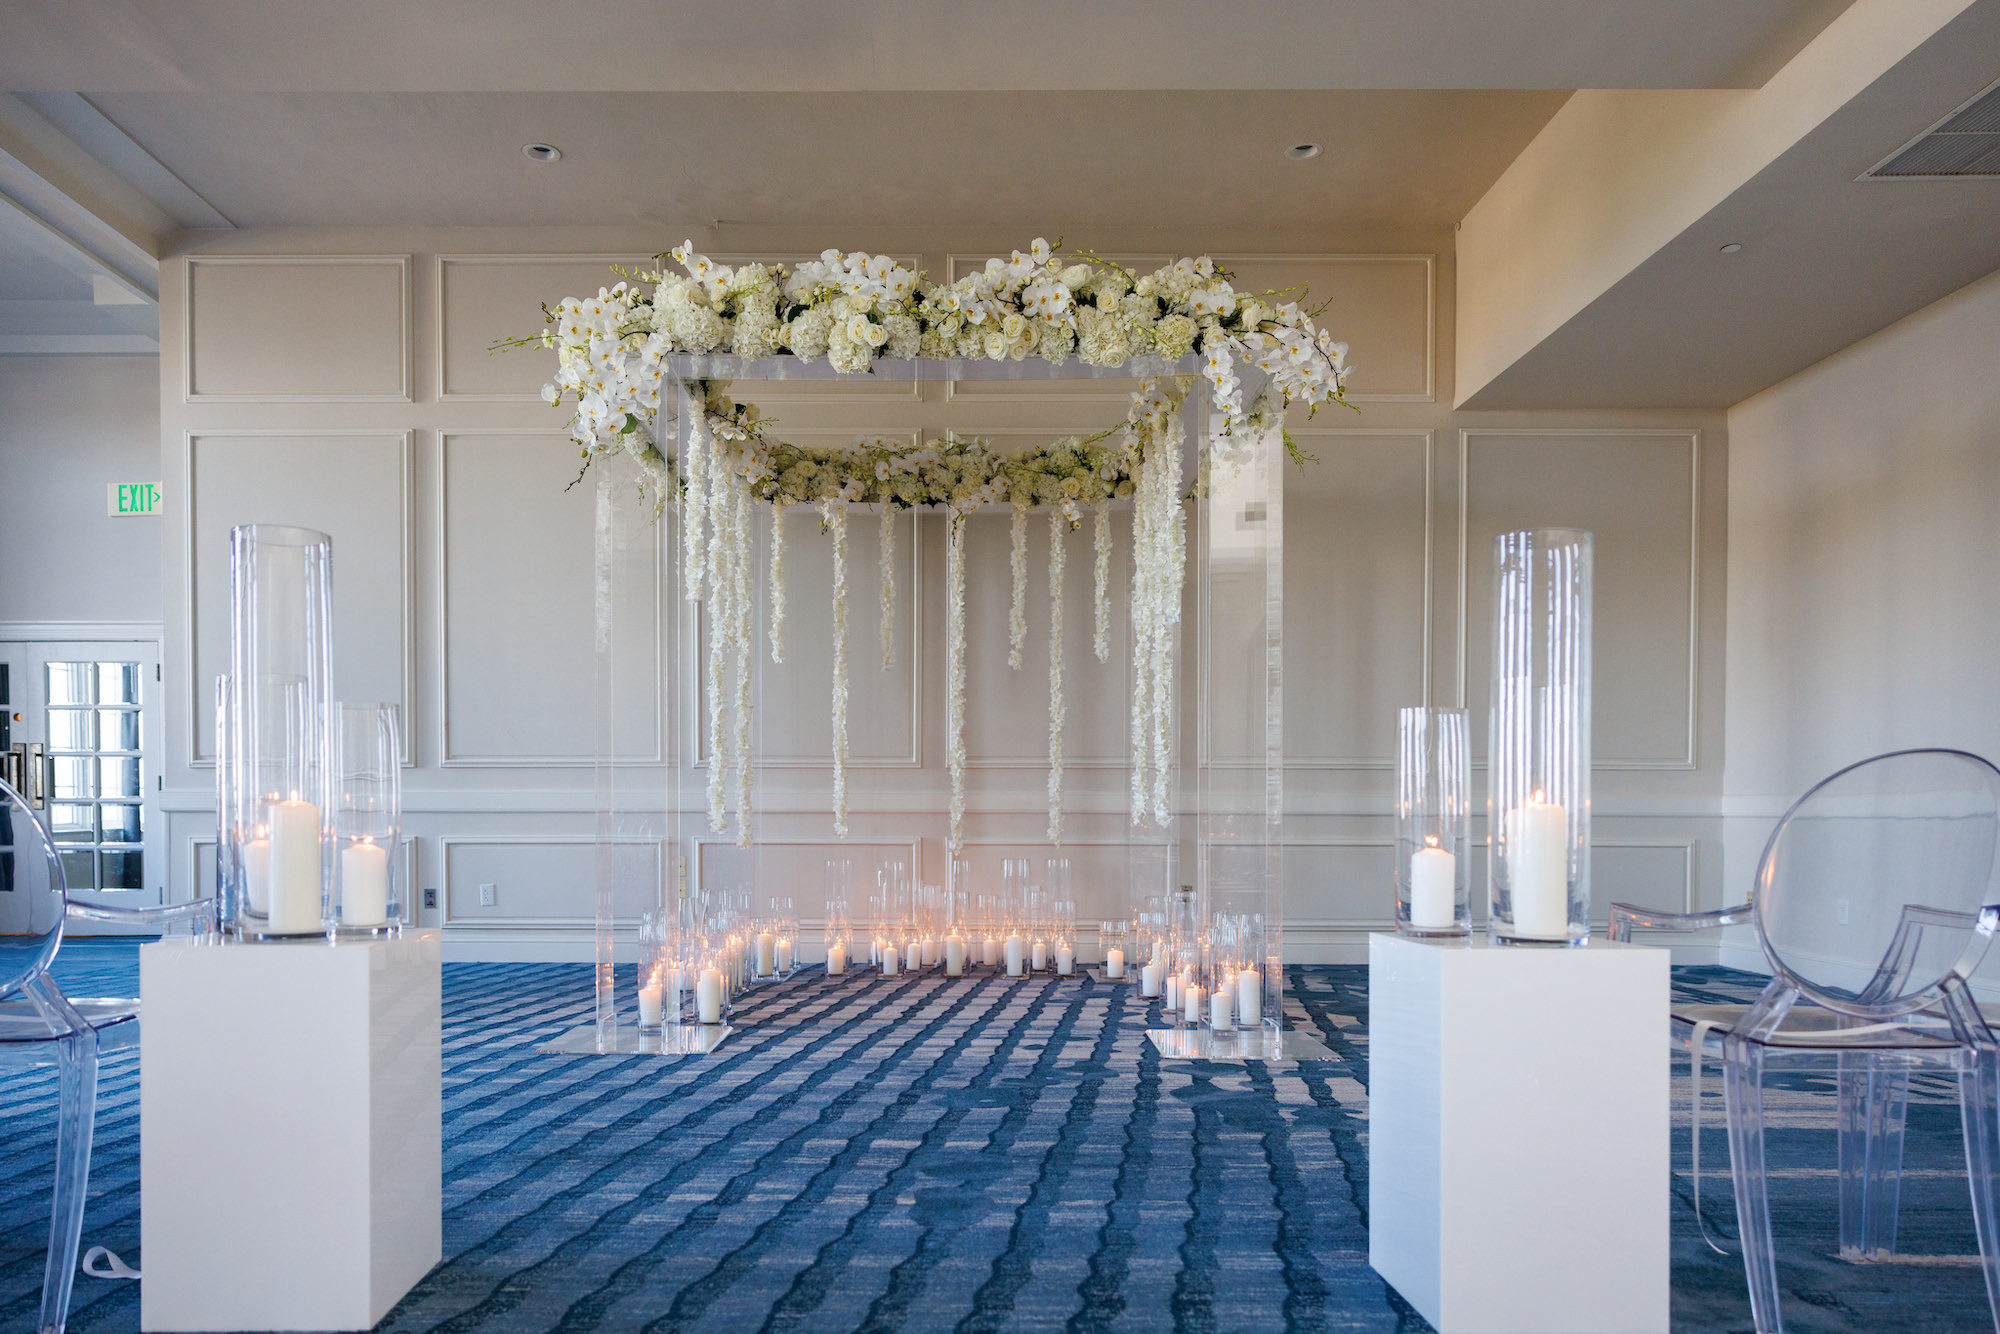 Timeless Modern Acrylic Wedding Ceremony Chuppah with Orchids and Cascading Wisteria | Jewish Wedding Inspiration | St. Pete Florist FH Events